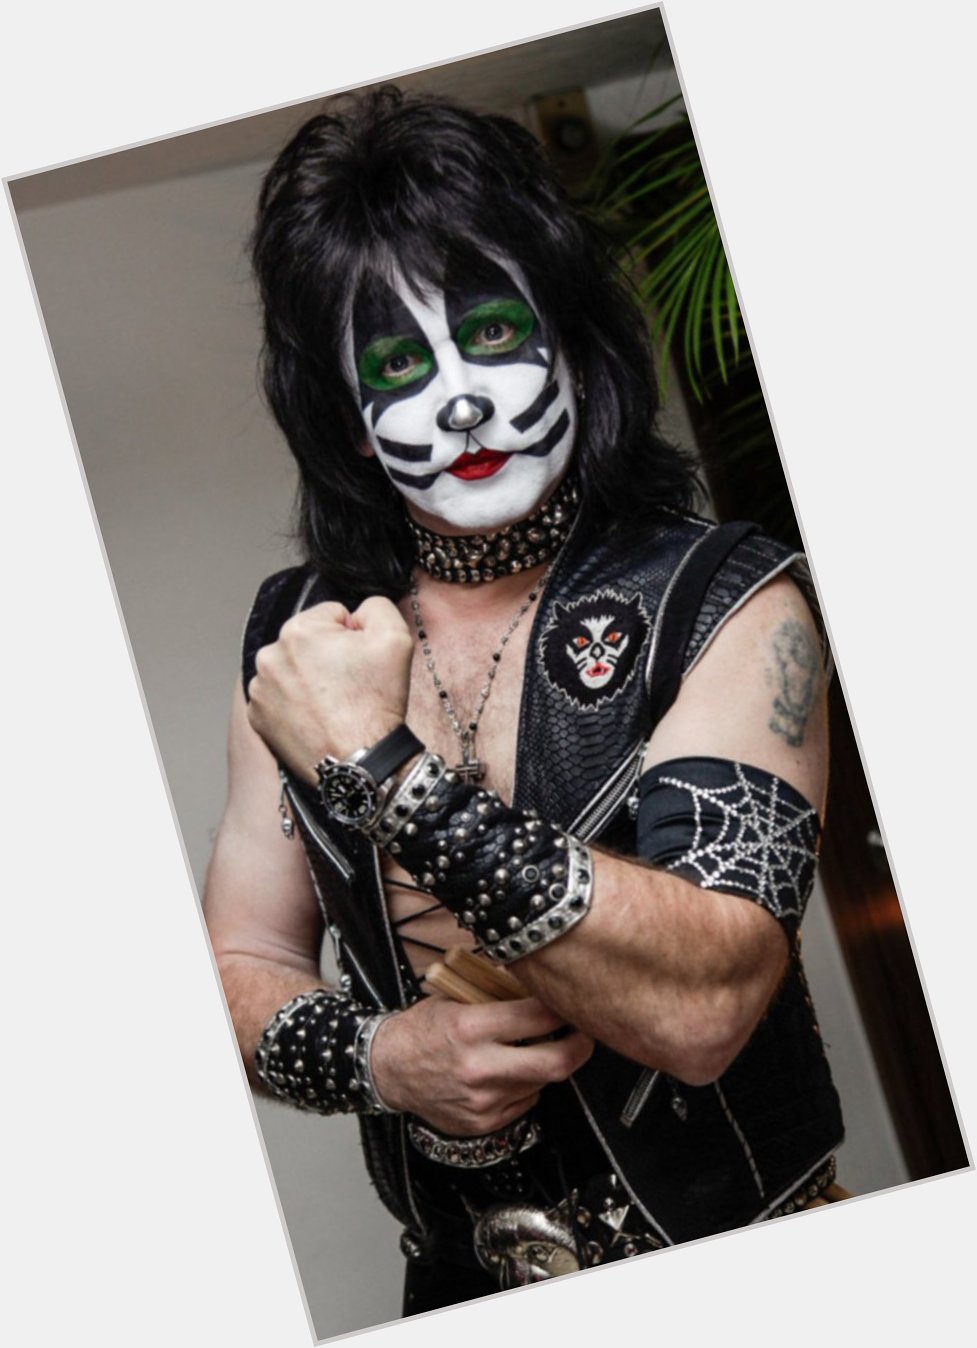 I WASNT ON message TWO DAYS AGO BUT HAPPY BIRTHDAY TO ERIC SINGER OF KISS THE BAND 